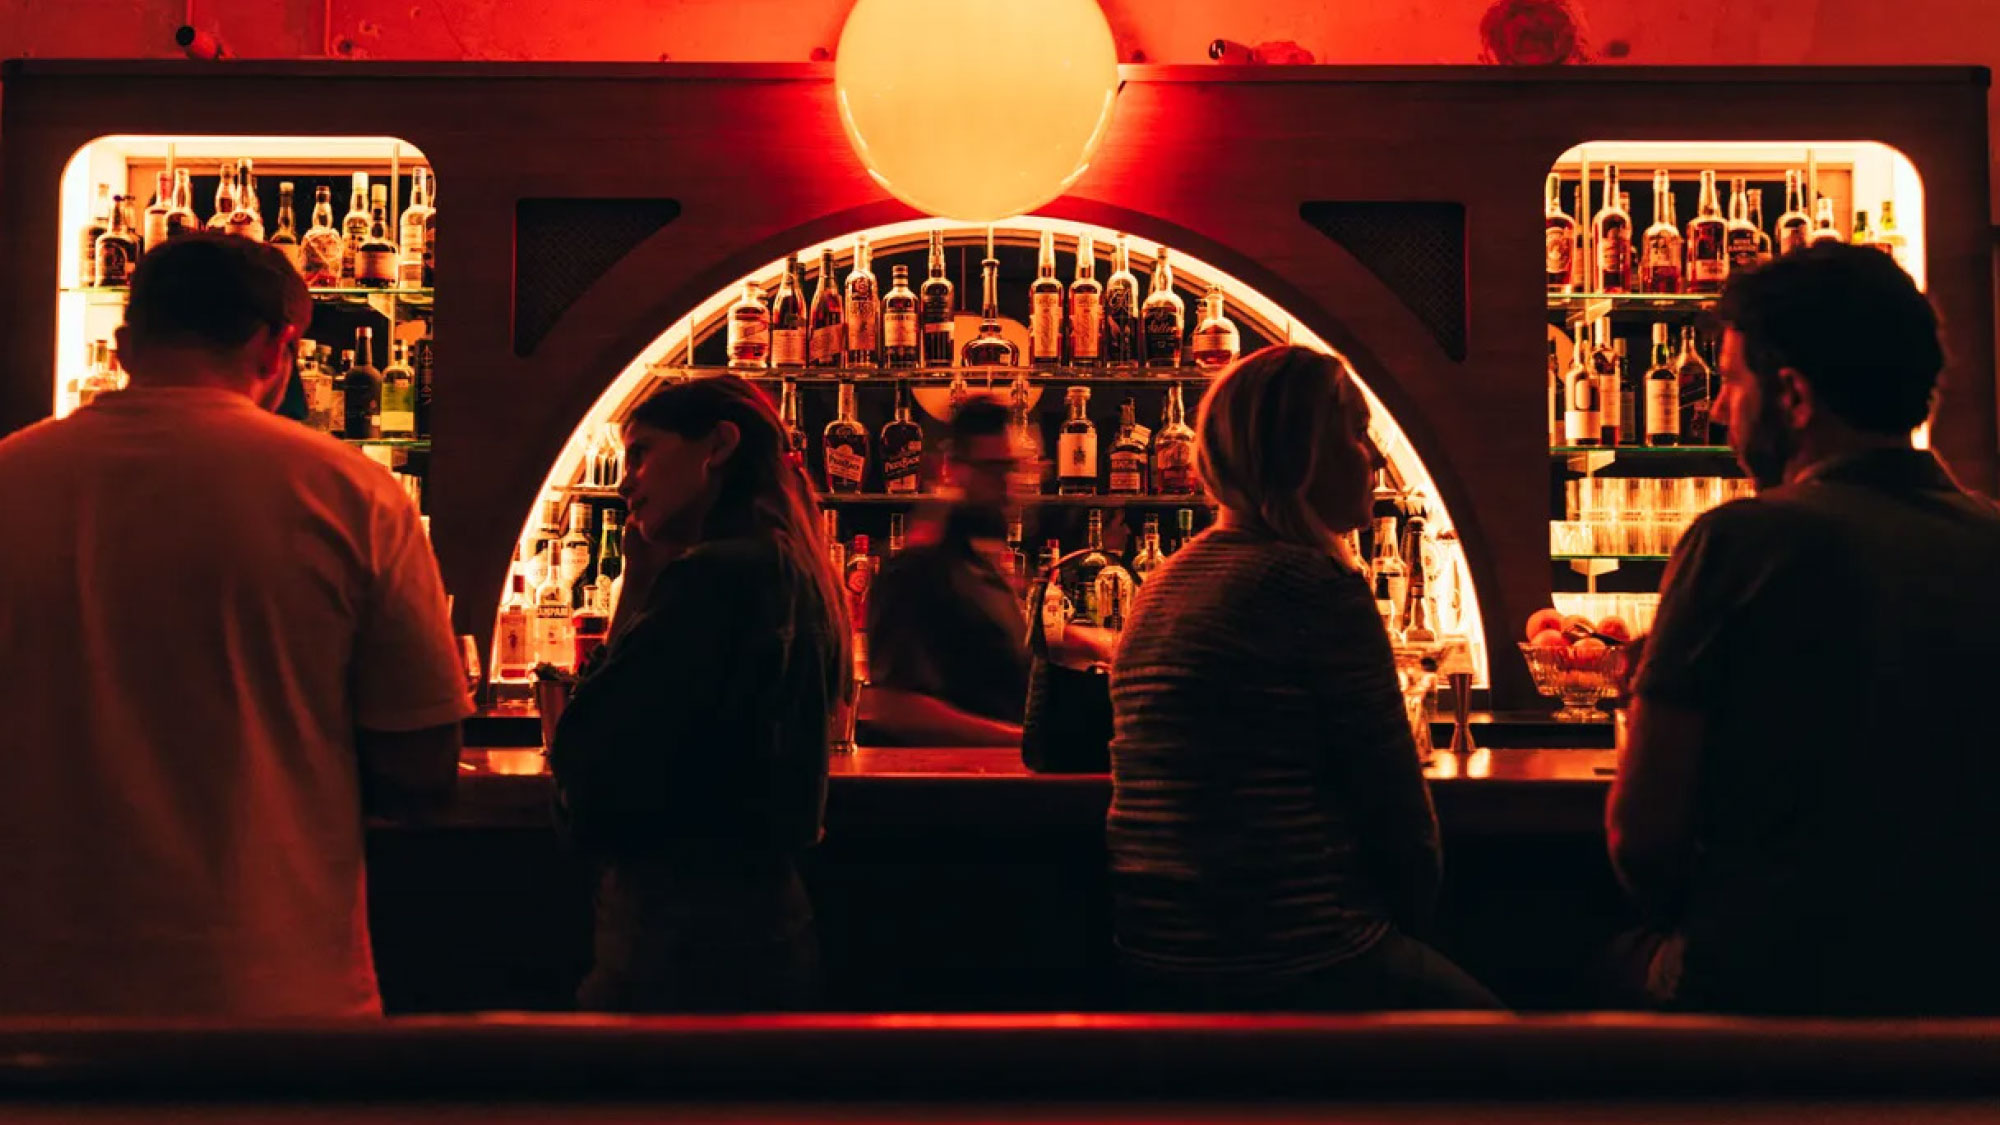 People enjoying a glowing red eclectic cocktail bar and nightlife